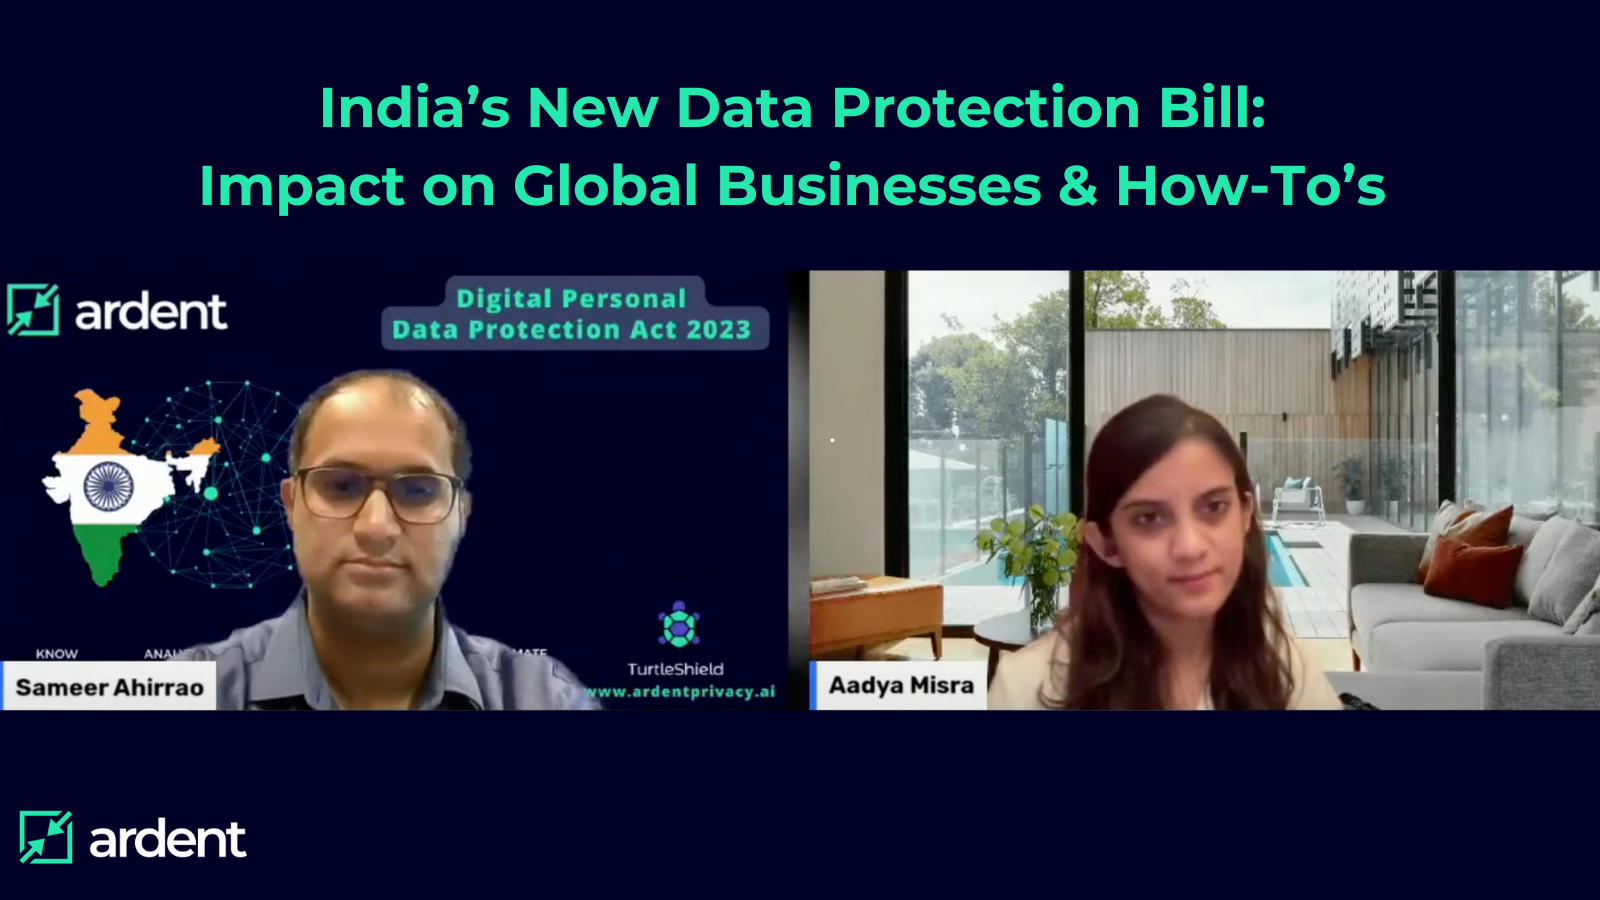 India’s New Data Protection Bill: Impacts on Global Businesses and How-To’s